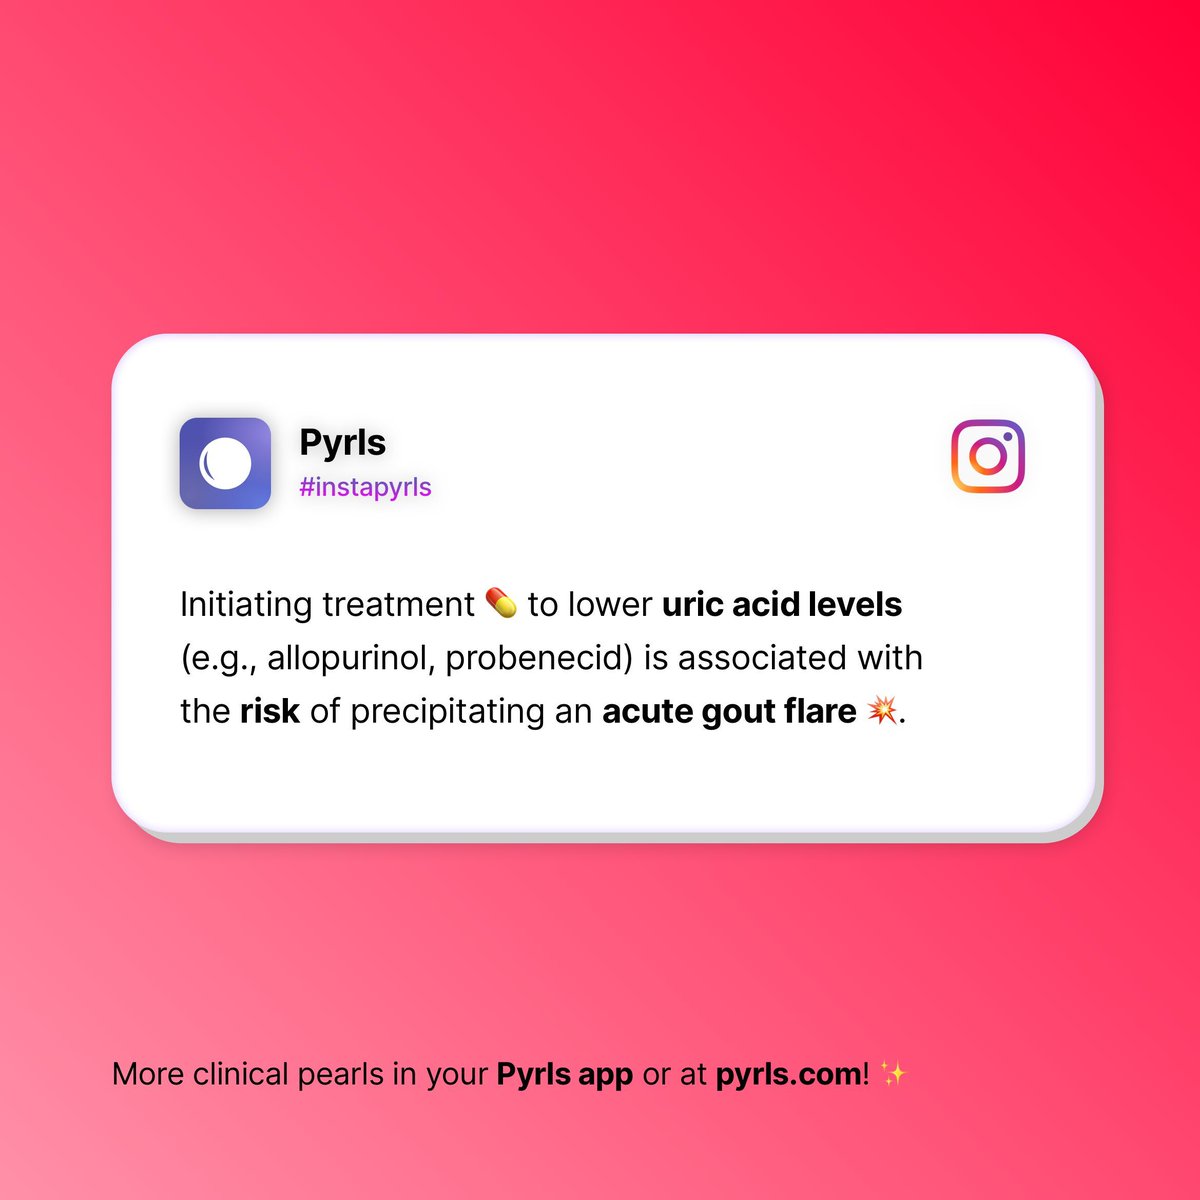 Initiating treatment 💊 to lower uric acid levels (e.g., allopurinol, probenecid) is associated with the risk of precipitating an acute gout flare 💥.